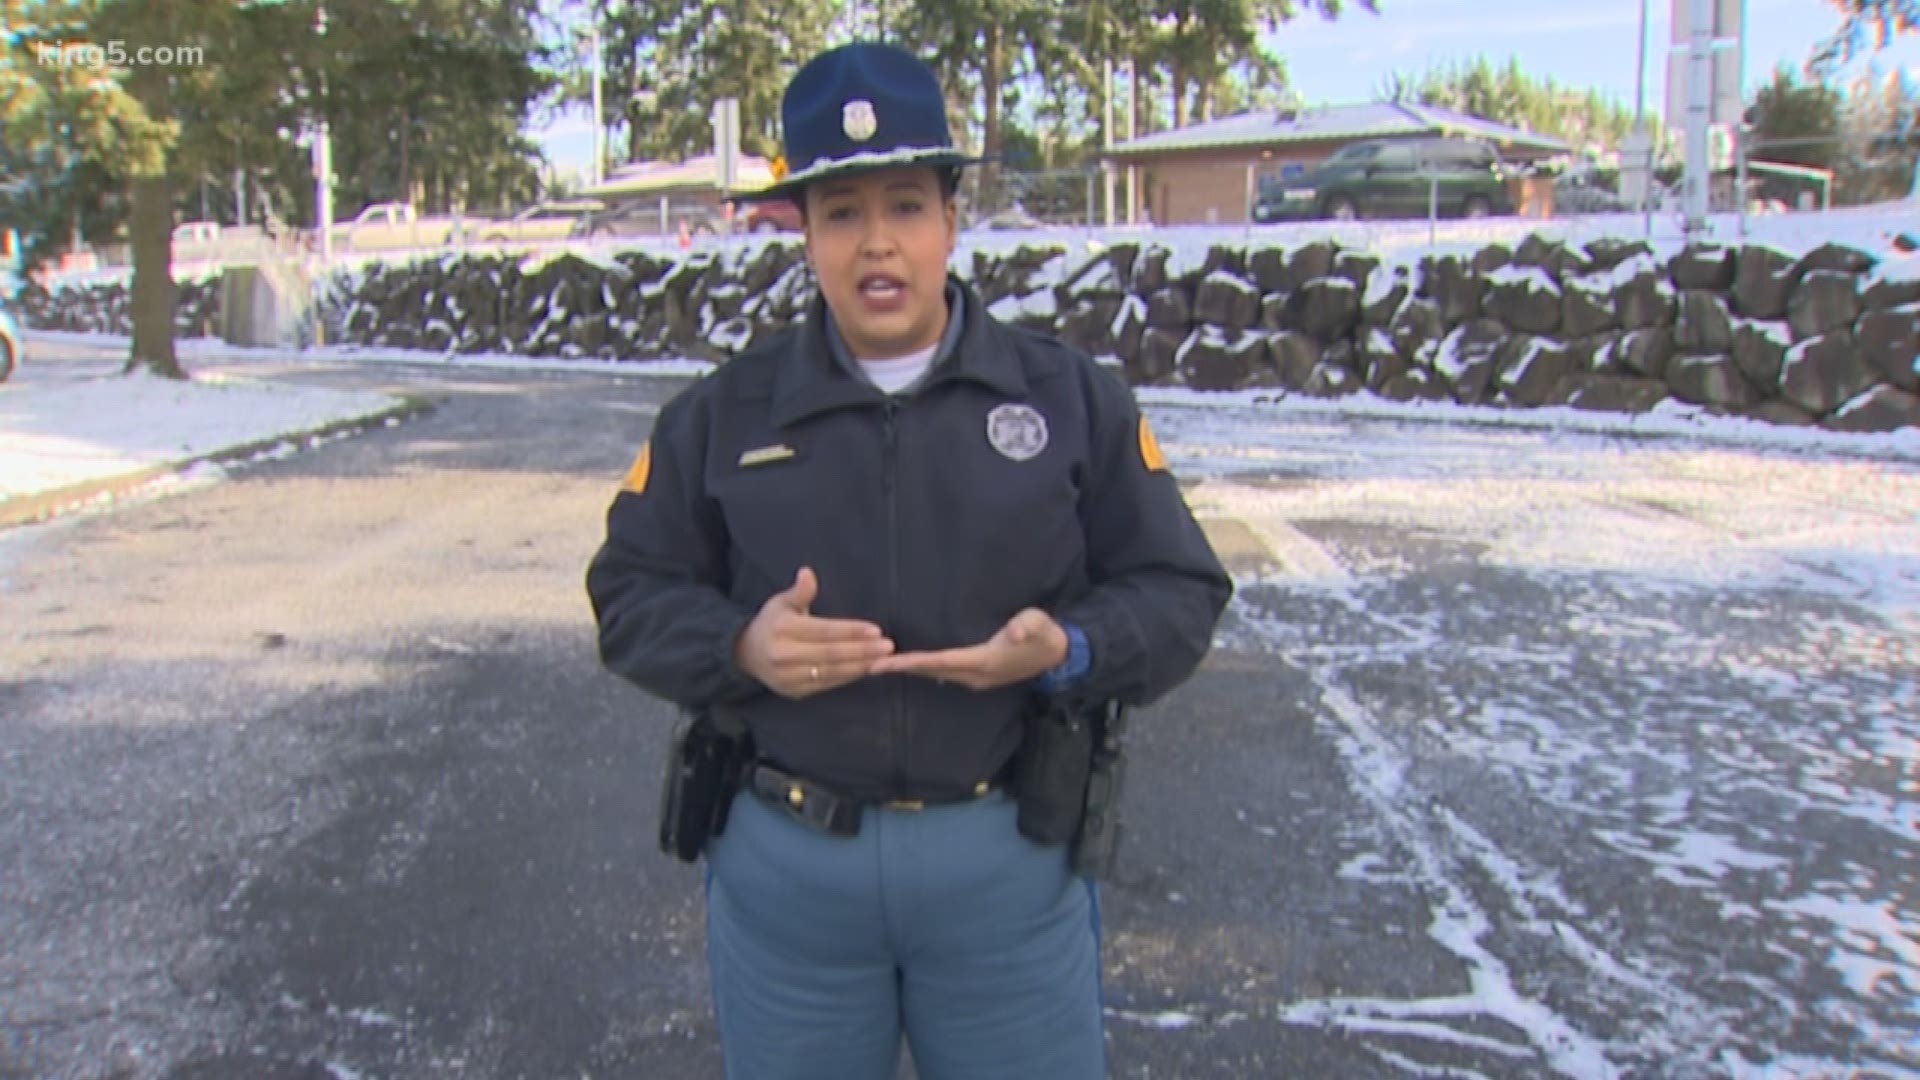 Washington State Patrol trooper Johnna Batiste shares advice for driving on icy roads.